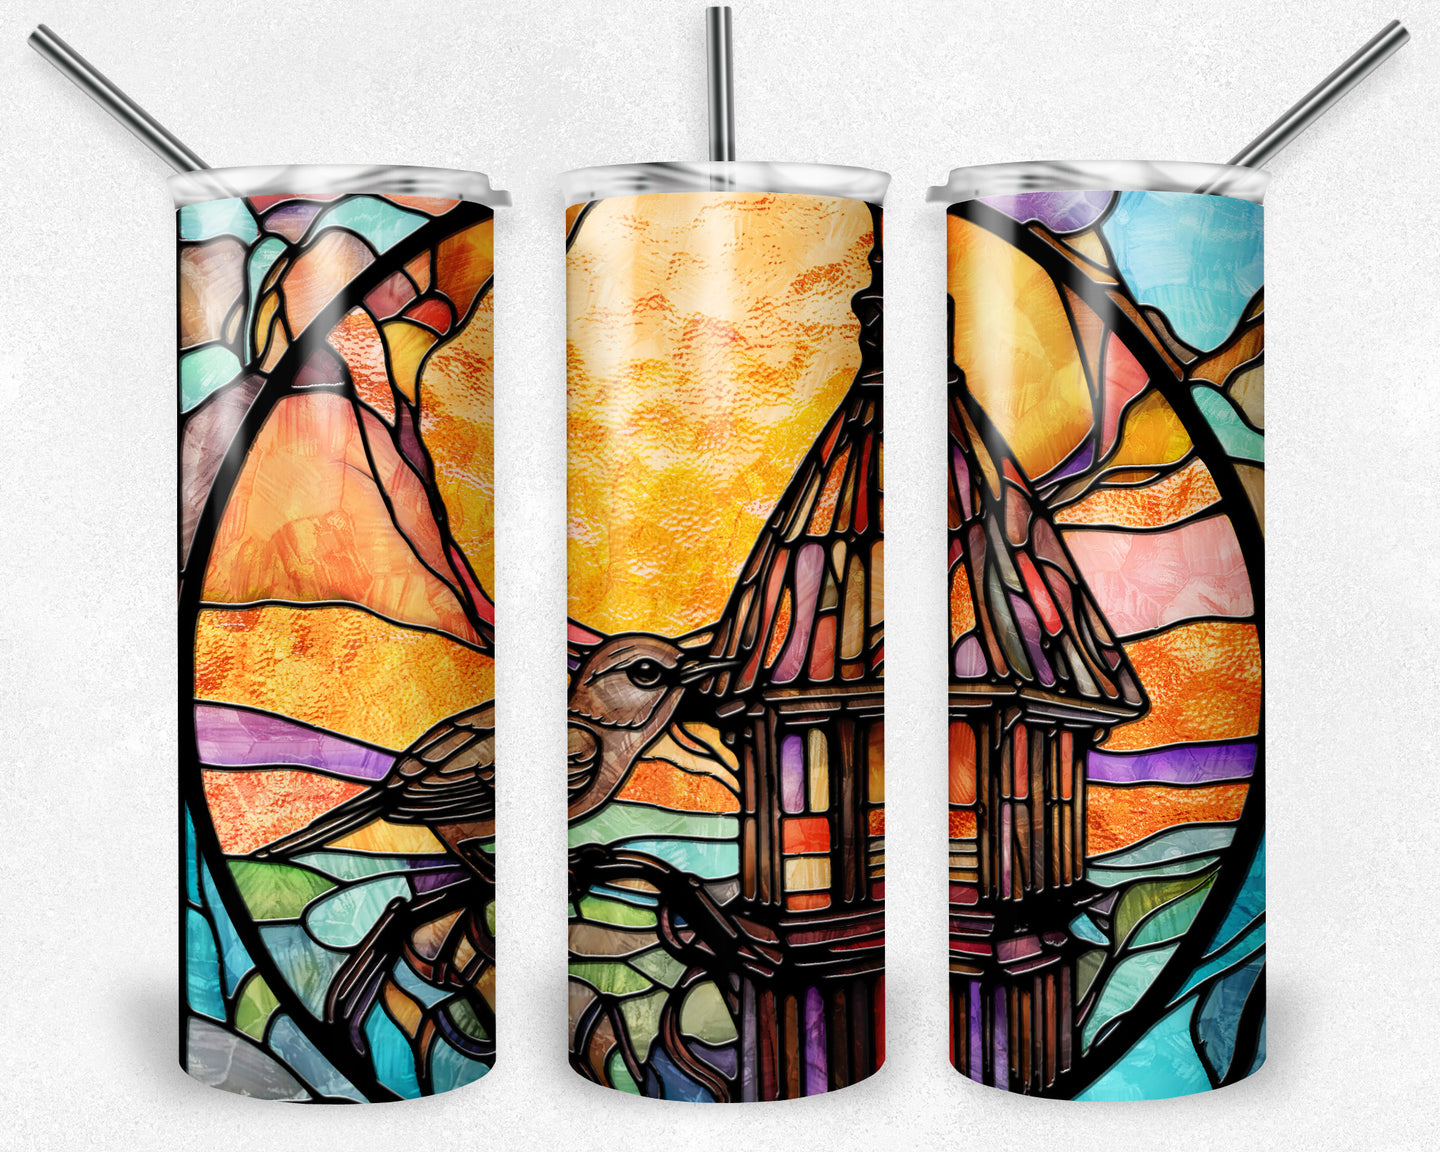 Wren and bird house Stained Glass